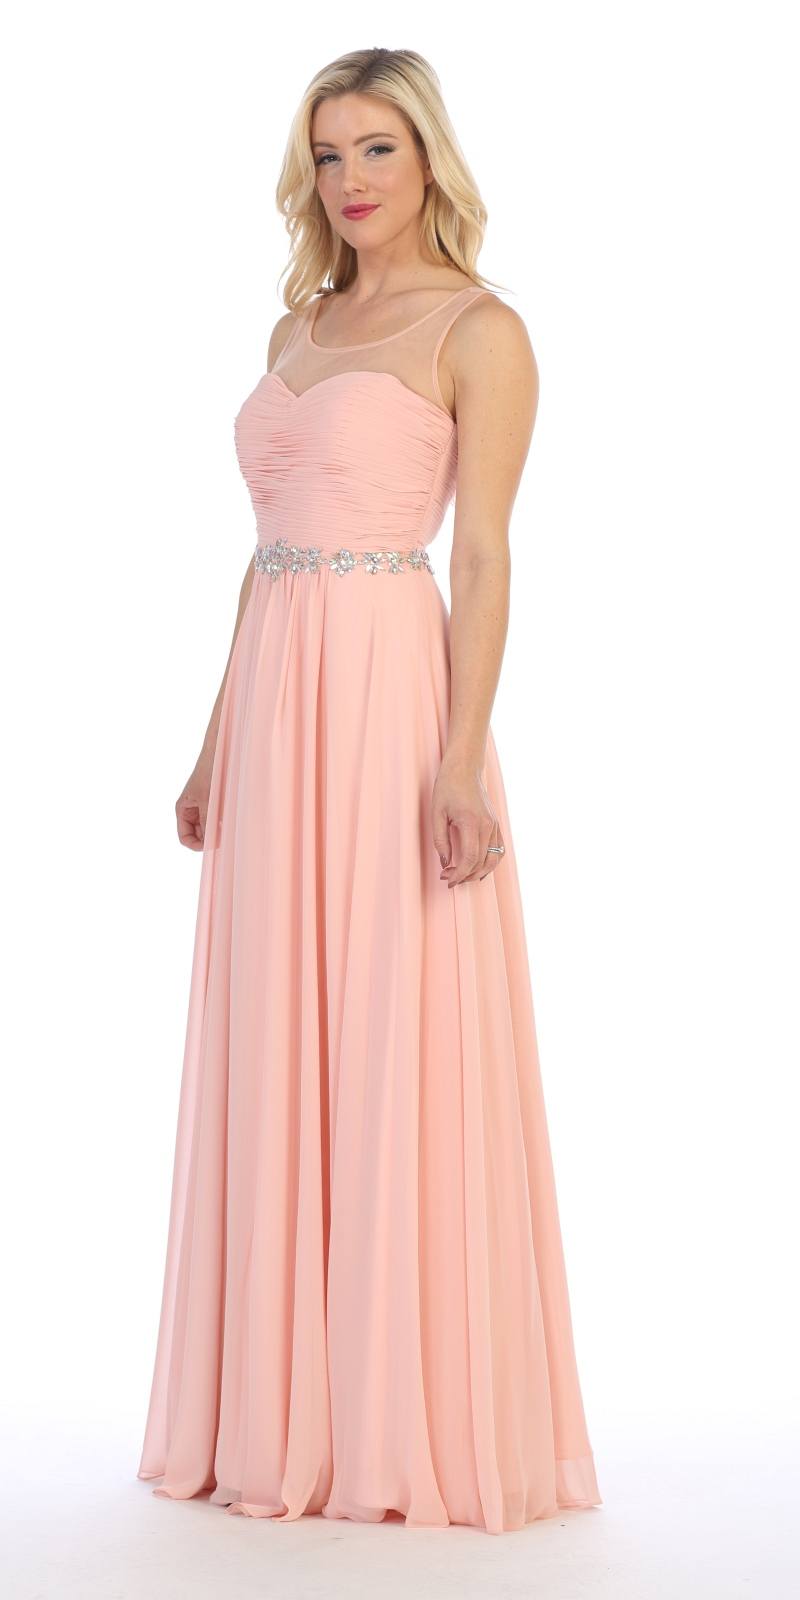 Celavie 5020 Blush Illusion Ruched Bodice Long Formal Dress Sleeveless Side View